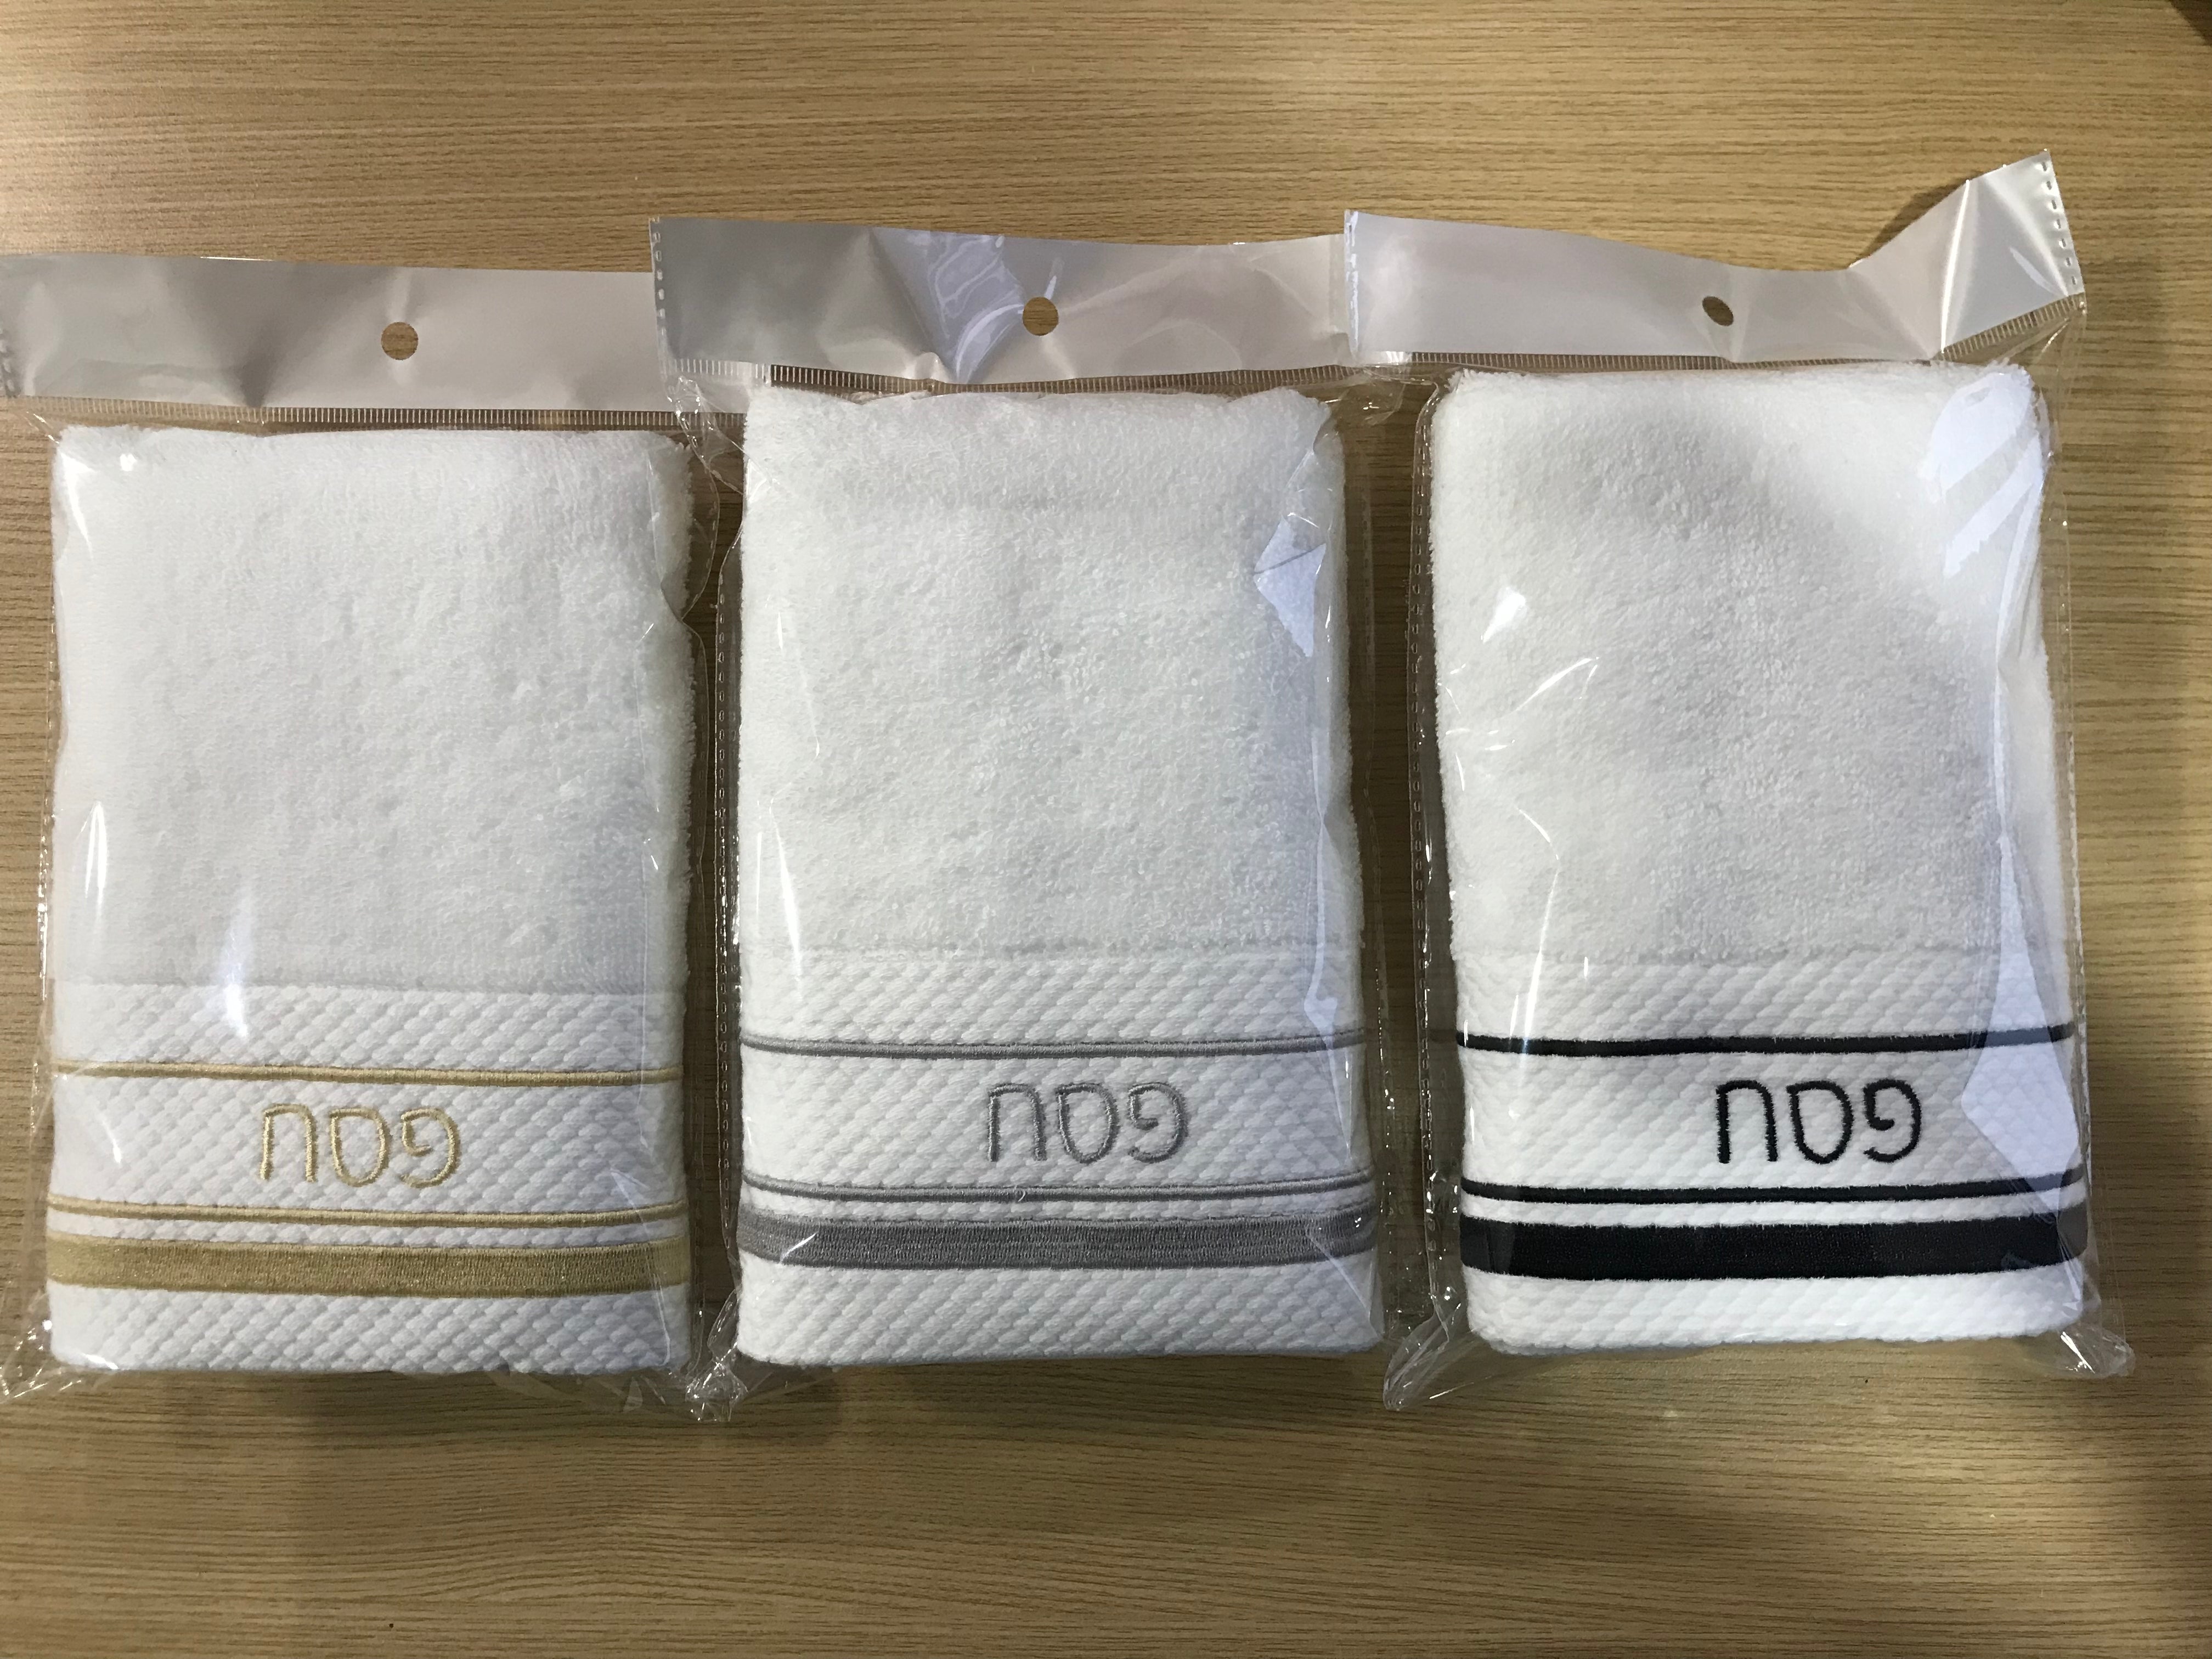 Luxury Hand Towel Pesach Embroidery White Black 14 x 30